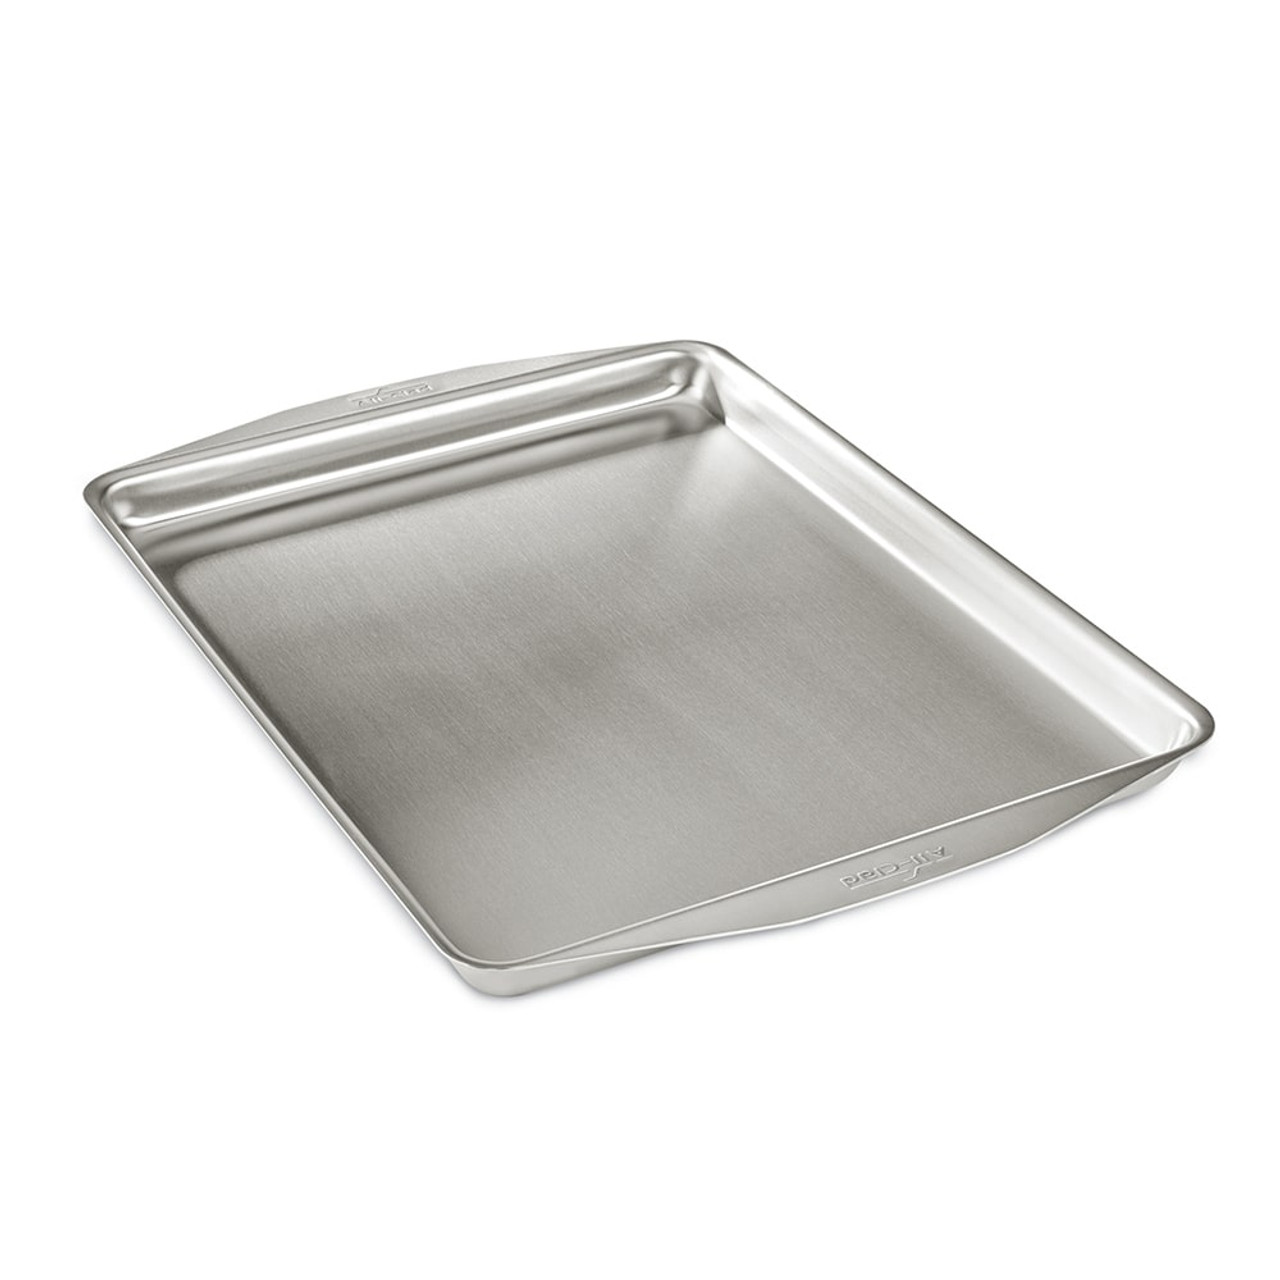 https://cdn11.bigcommerce.com/s-hccytny0od/images/stencil/1280x1280/products/3274/11700/all-clad-d3-stainless-jelly-roll-pan__62075.1589099282.jpg?c=2?imbypass=on